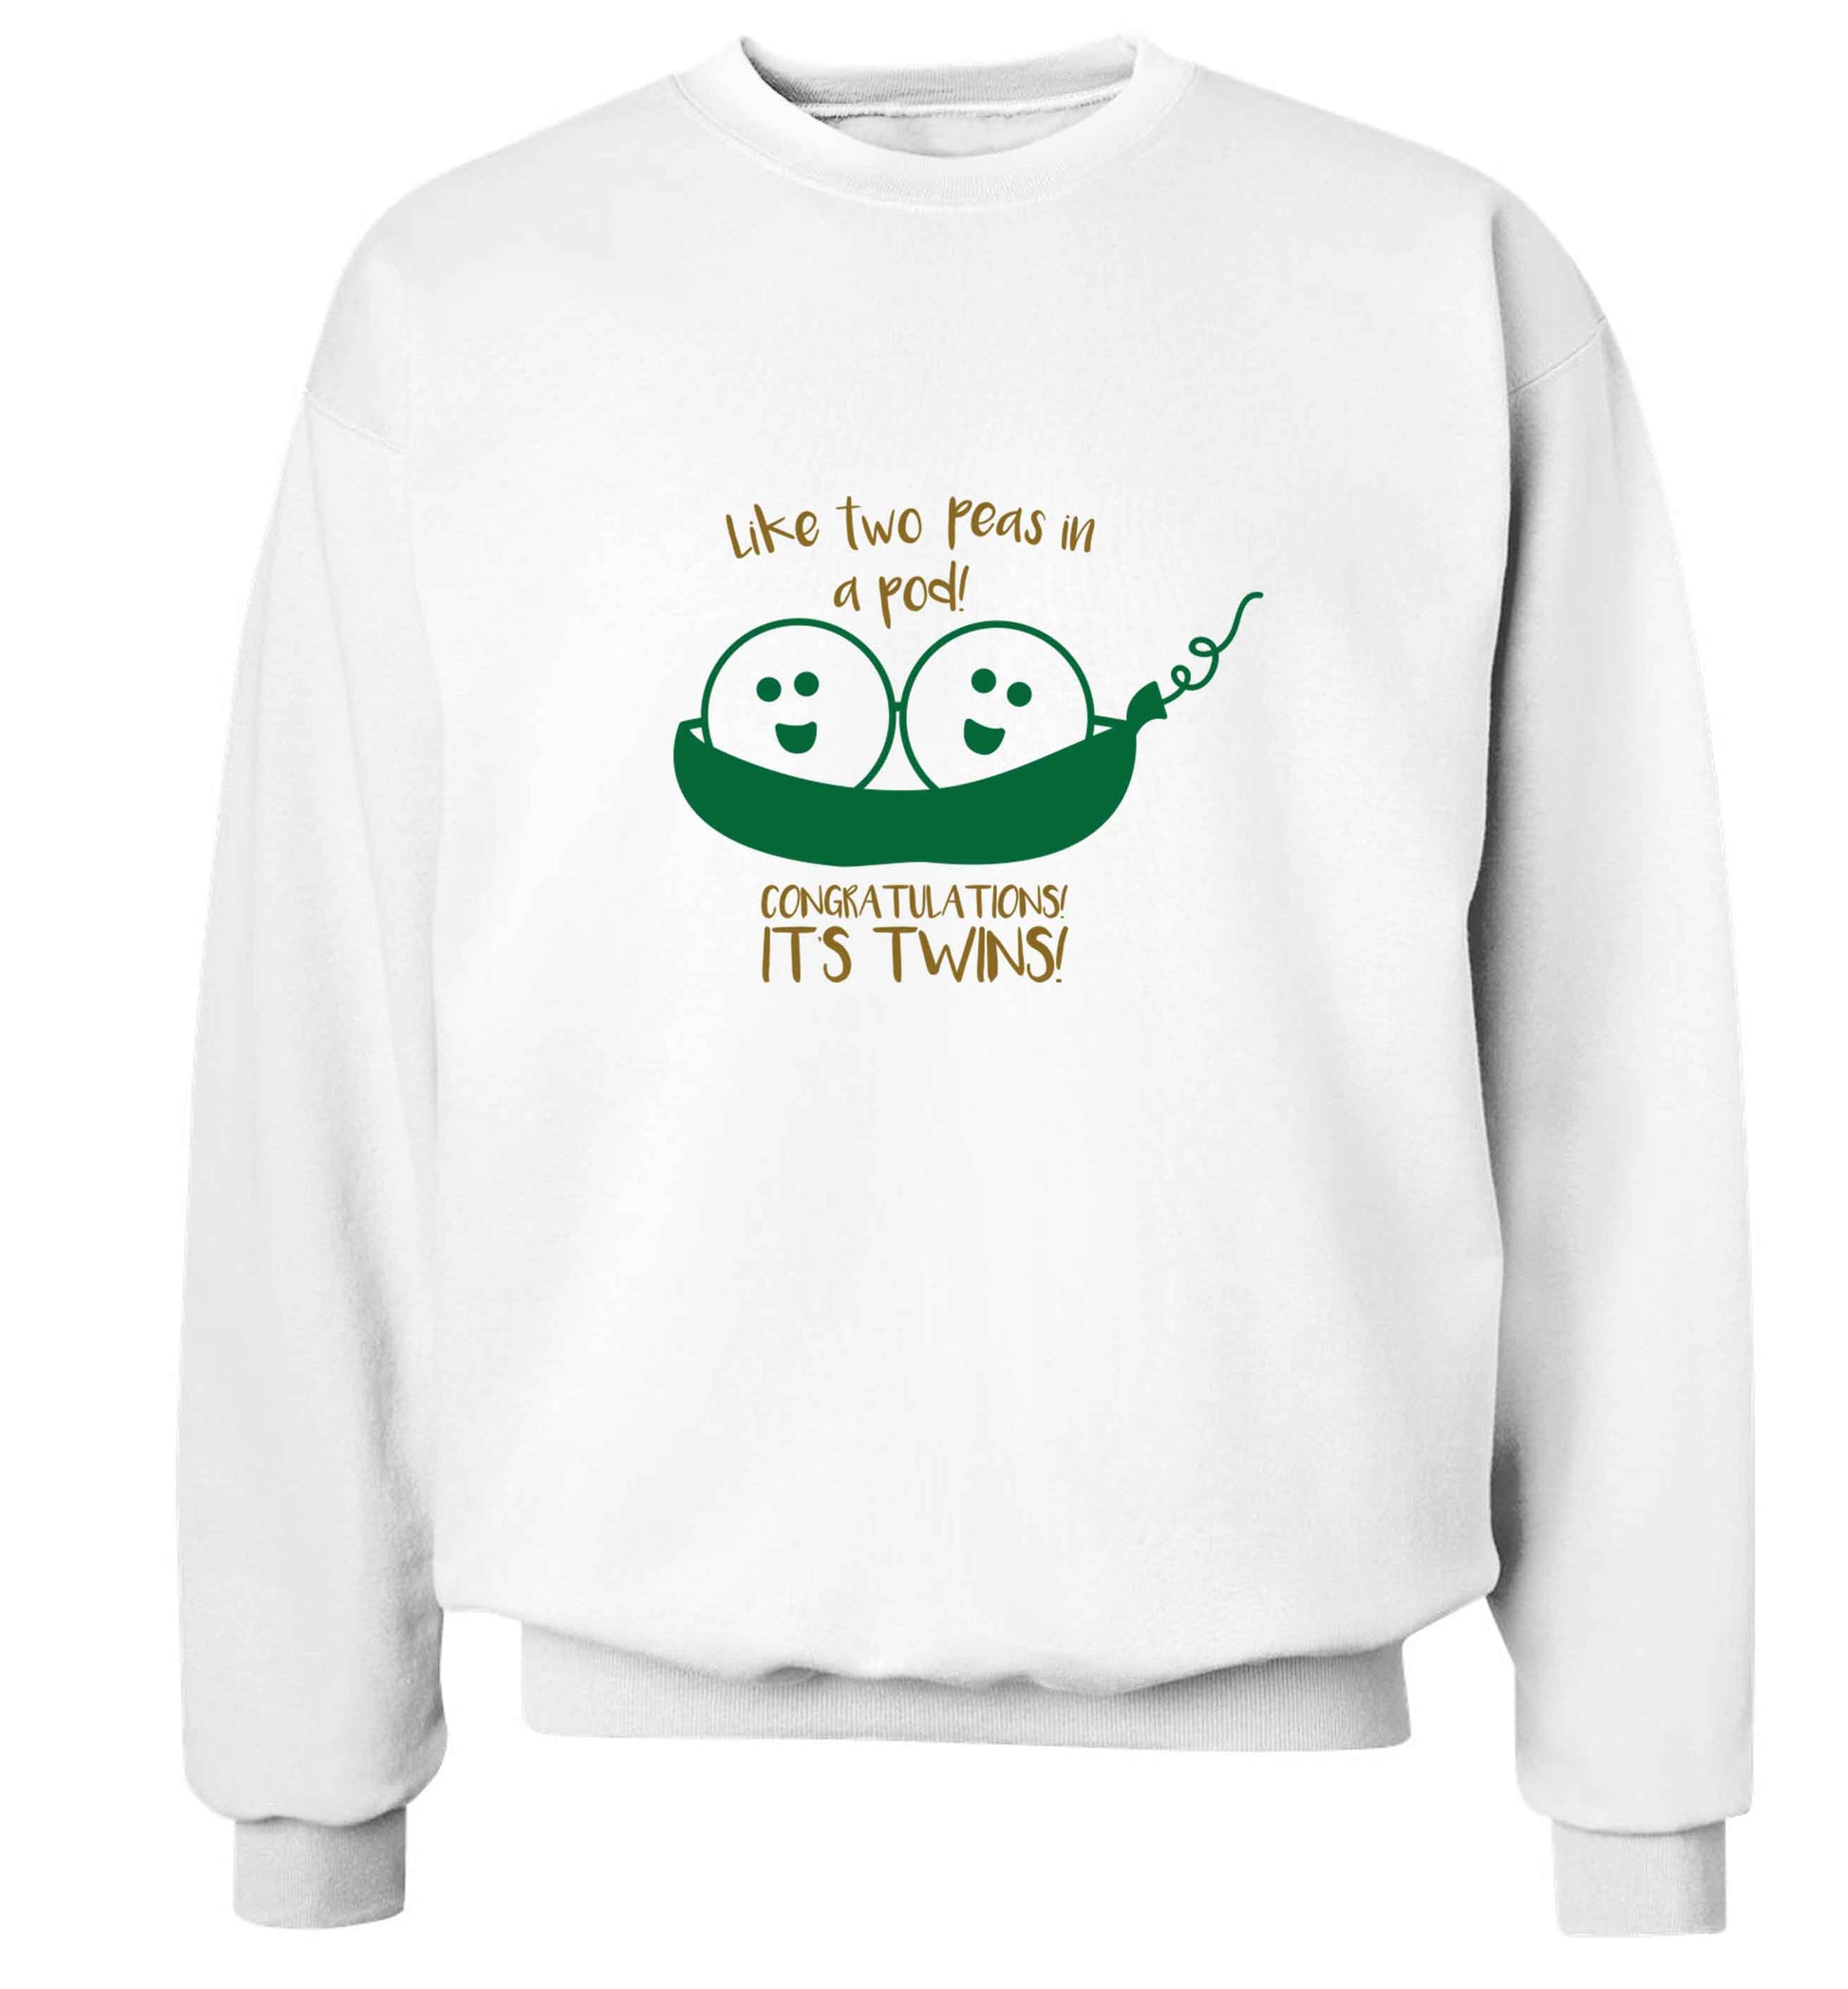 Like two peas in a pod! Congratulations it's twins! adult's unisex white sweater 2XL